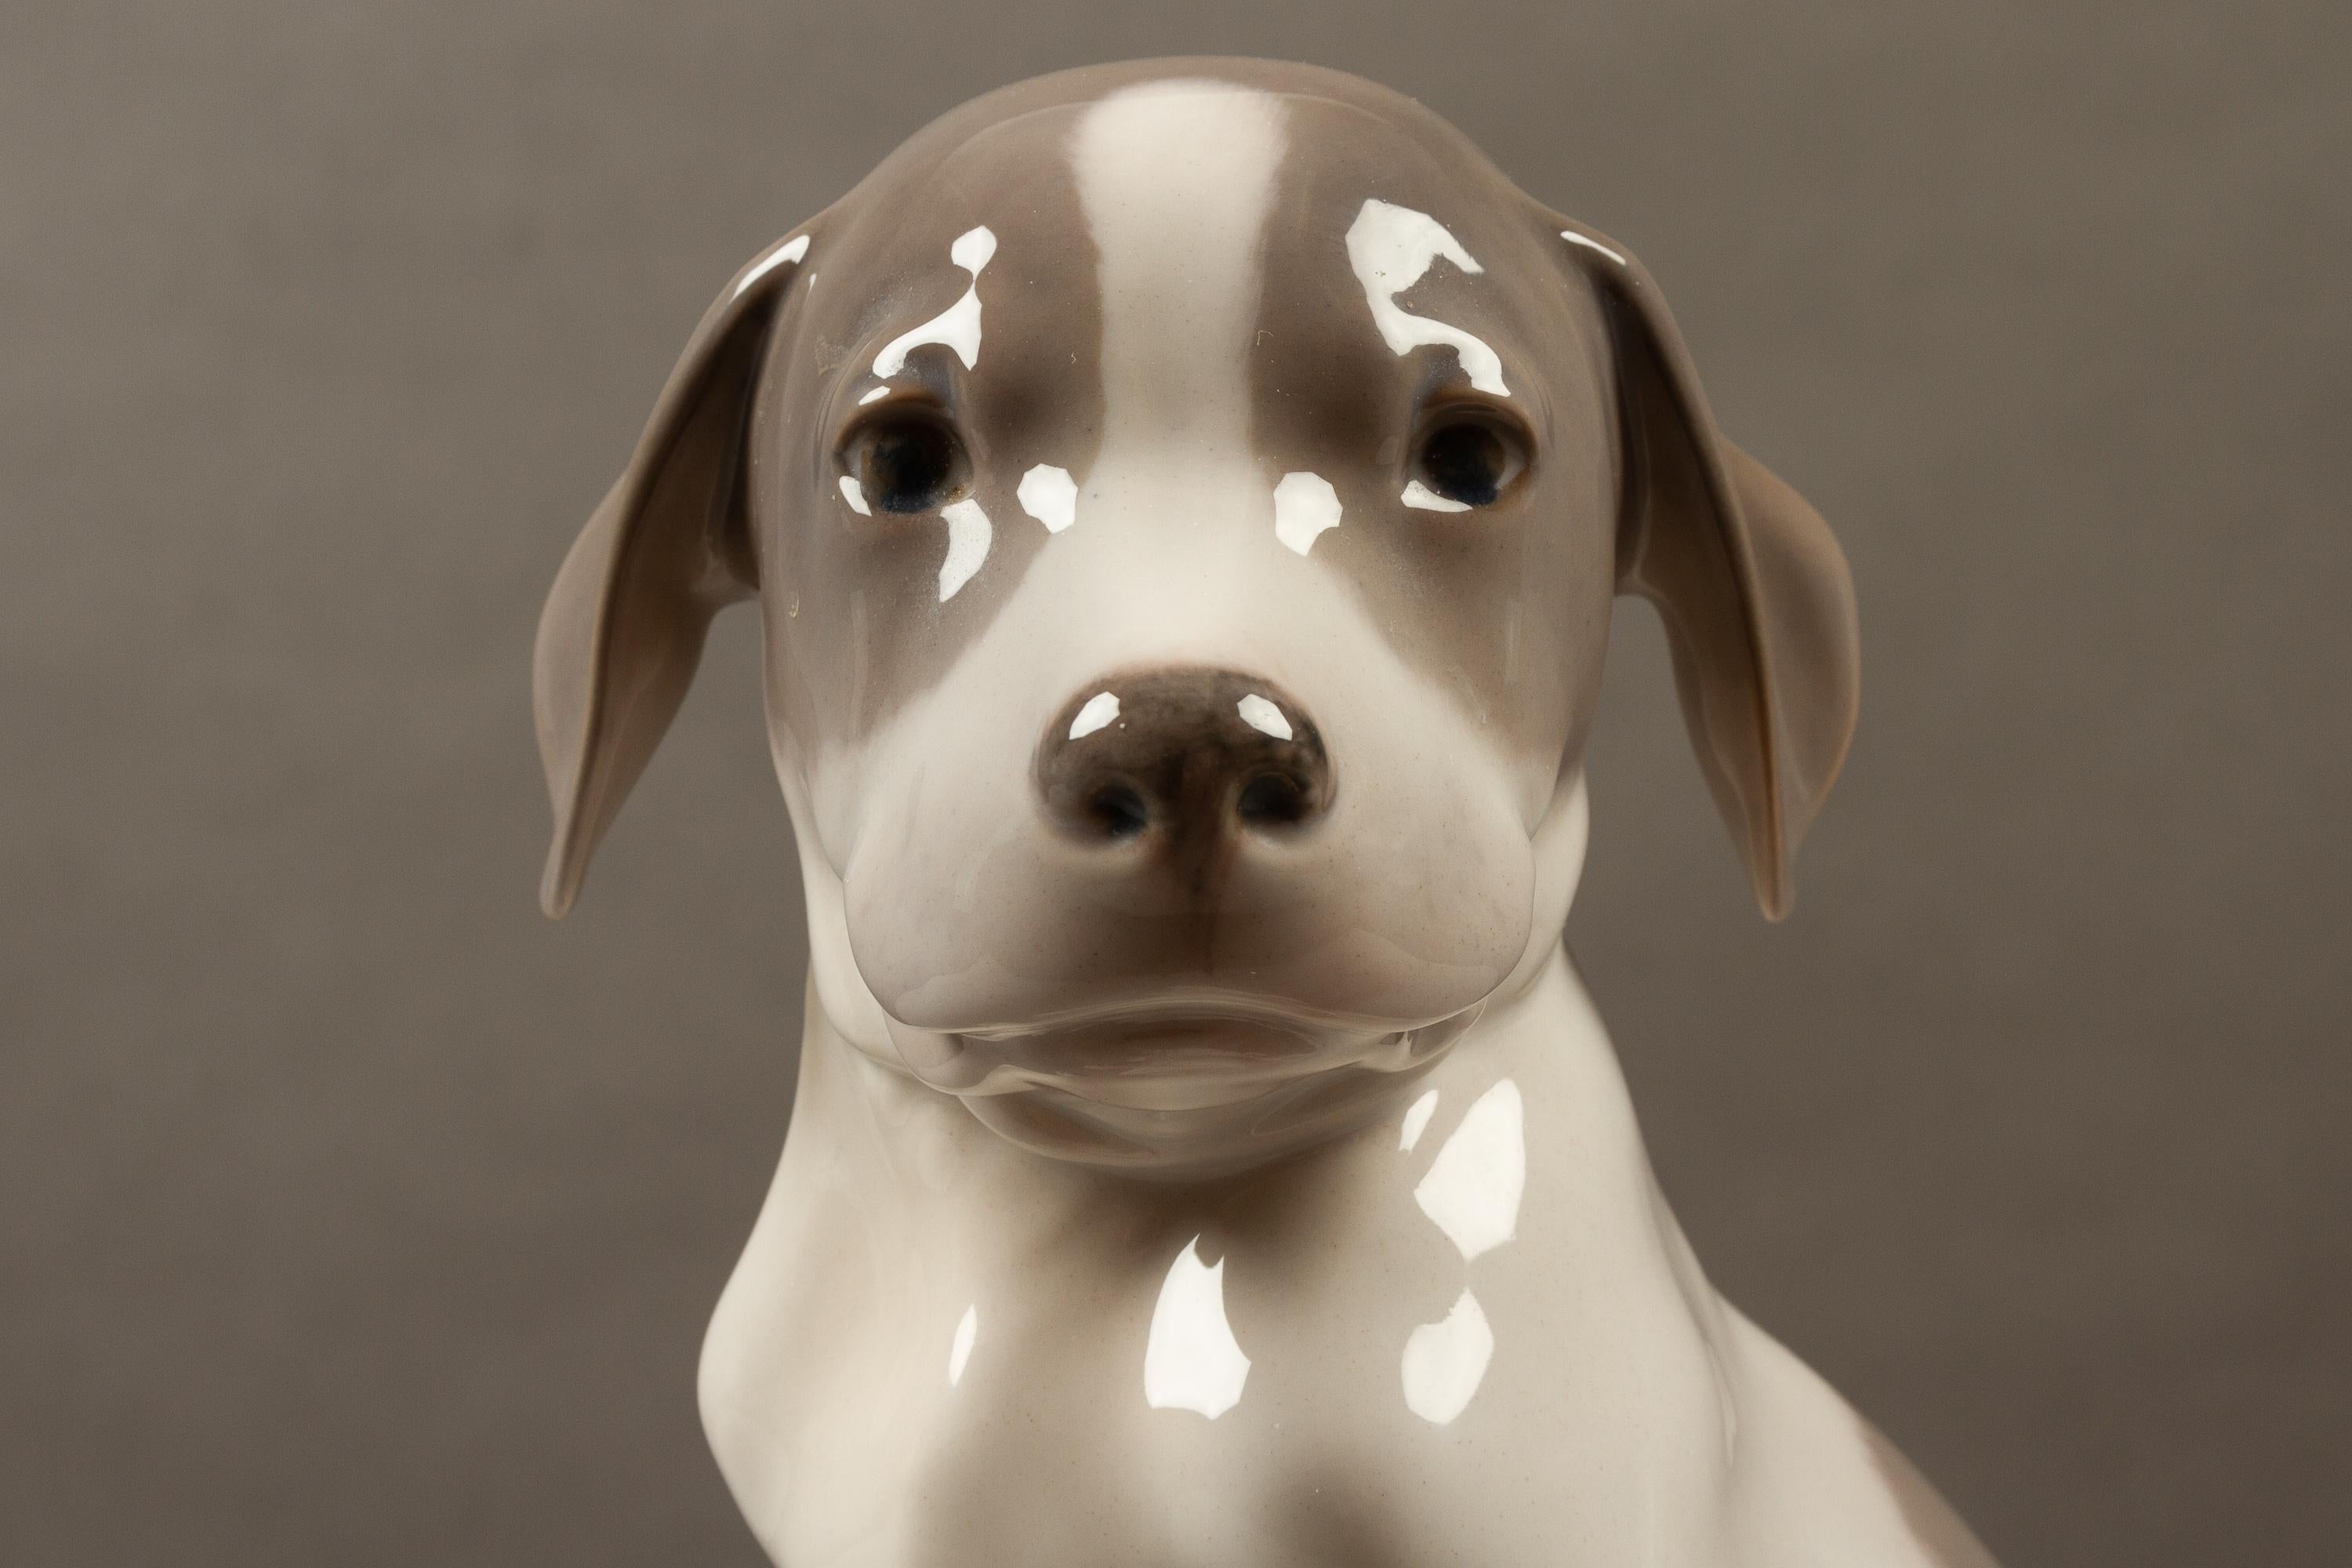 Large Porcelain Puppy 1452/259 by Erik Nielsen for Royal Copenhagen, 1952.
Designed in early 20th century. This specific item was made in 1952, and is first factory quality. The puppy is 20.5 cm tall. Very lifelike expression and